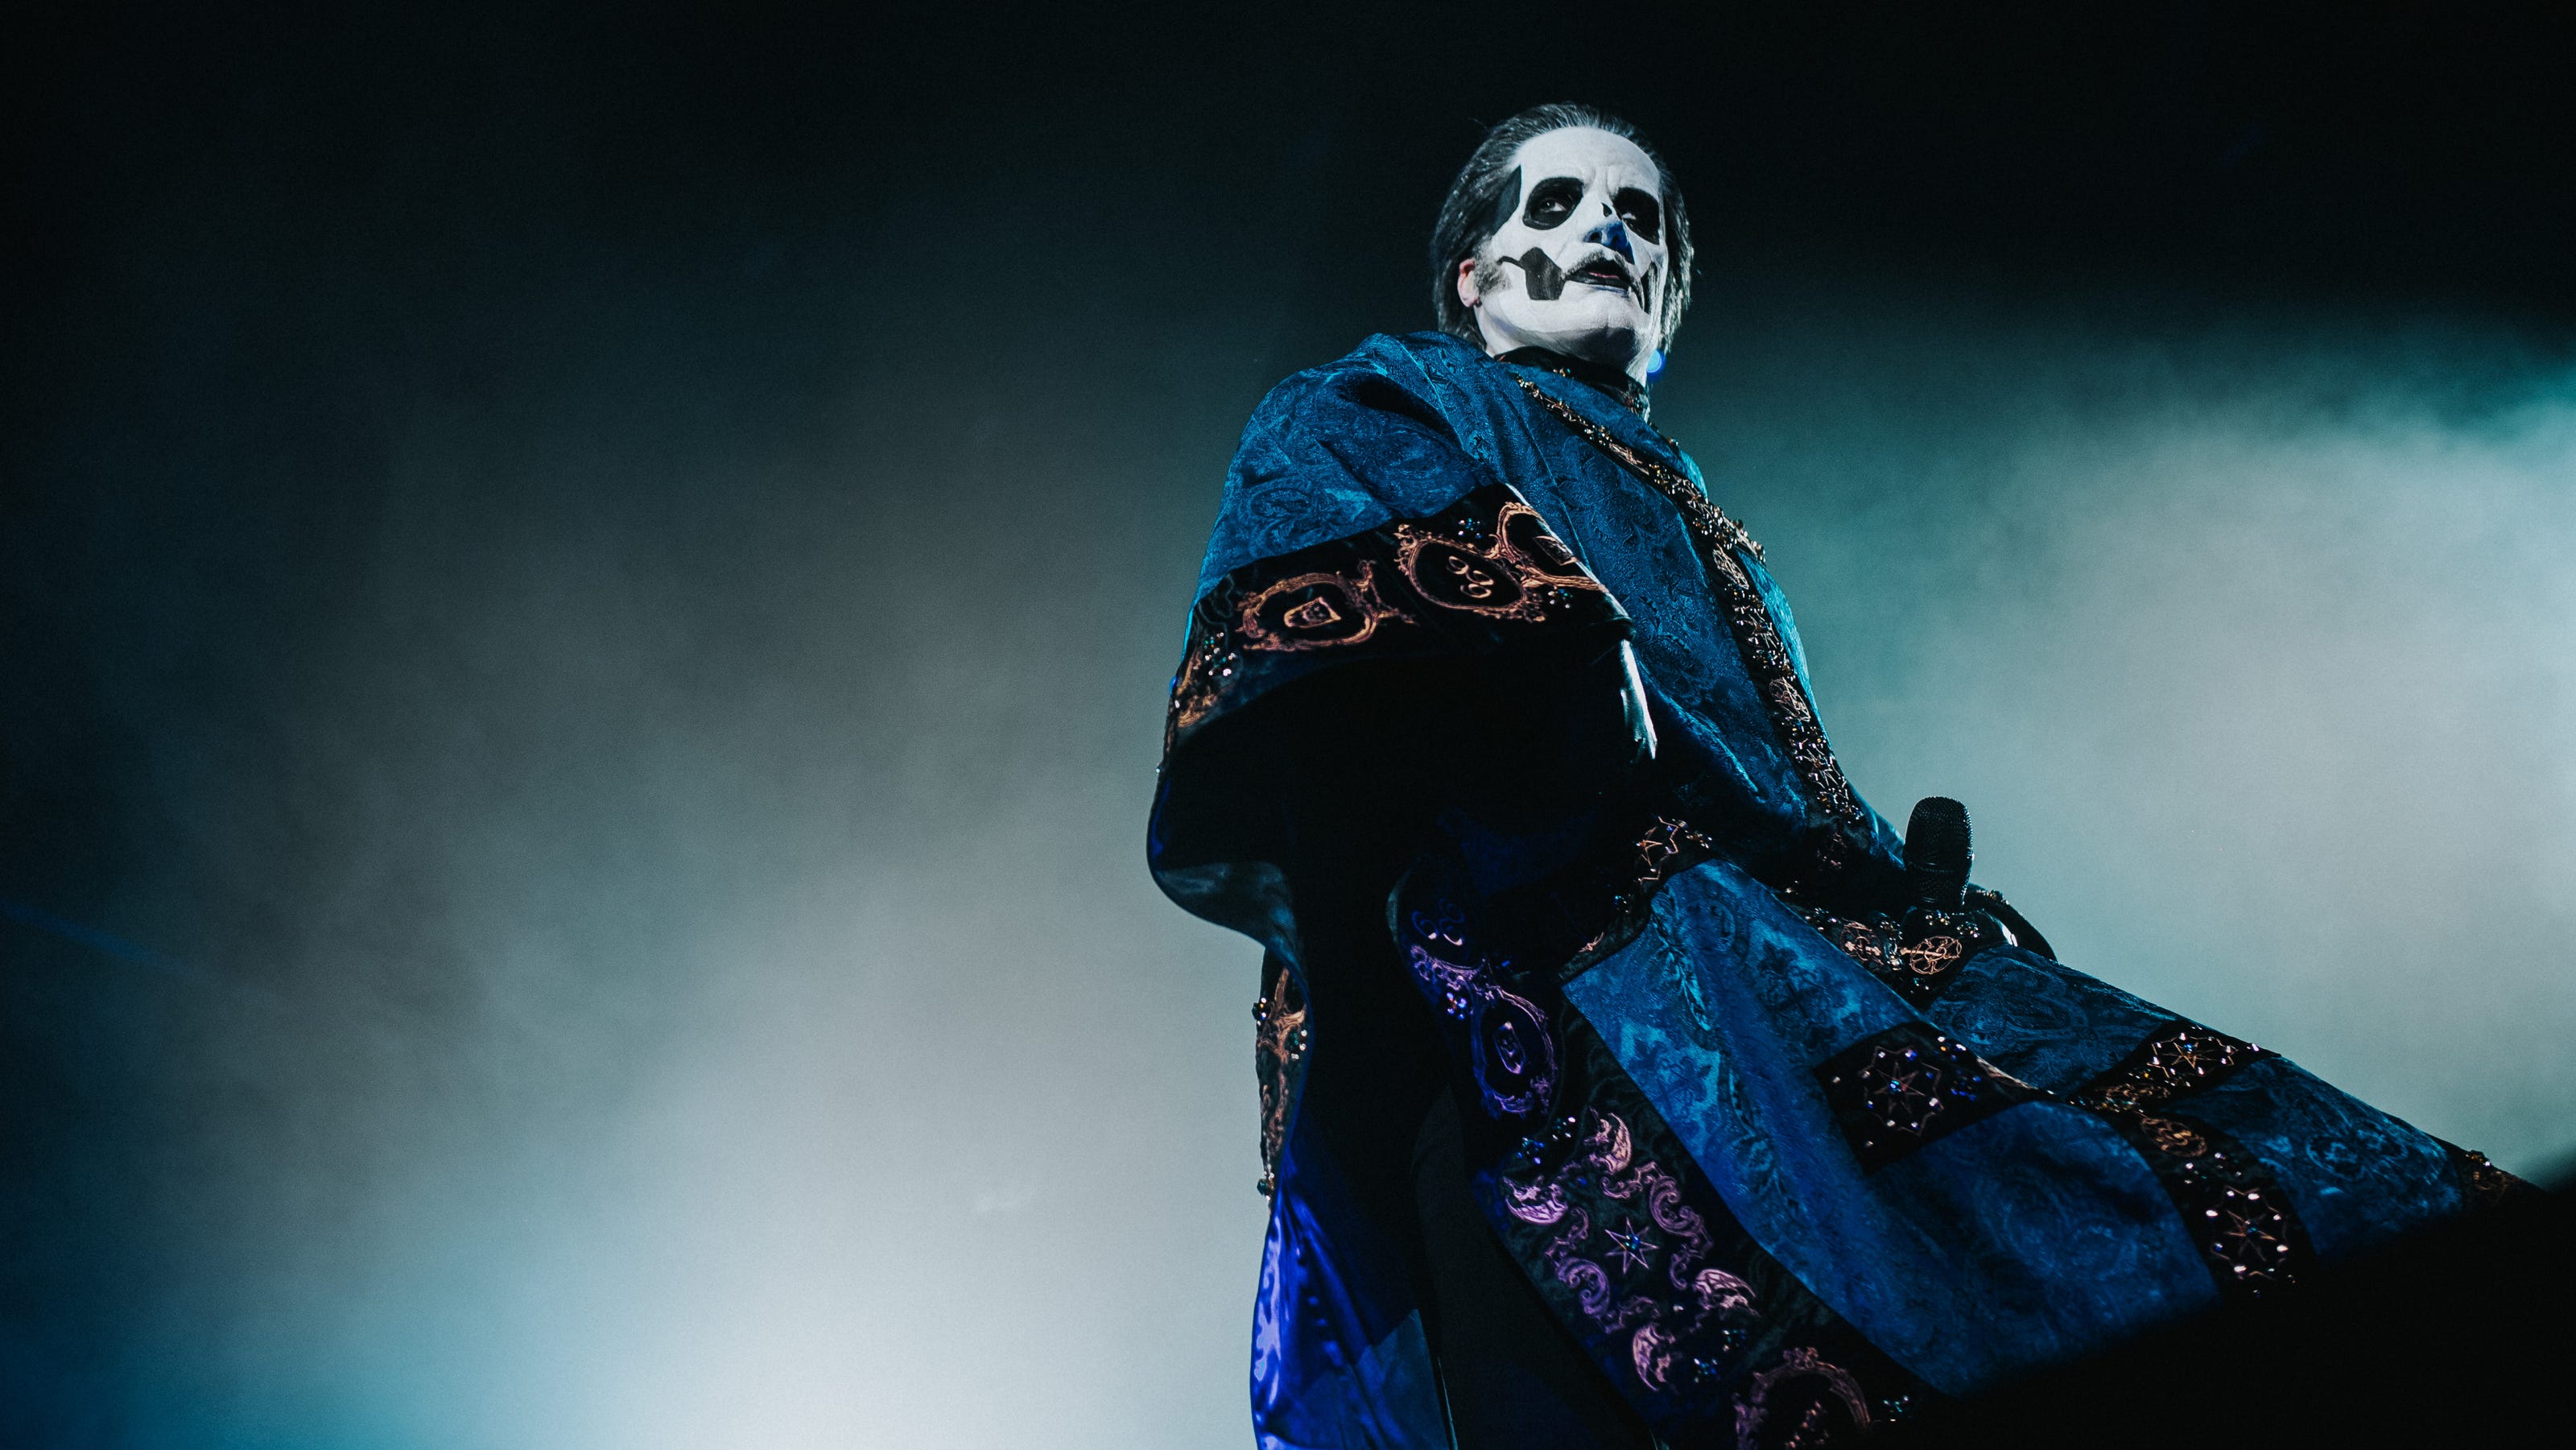 Concert: Ghost and Volbeat coming to El Paso in February 2022